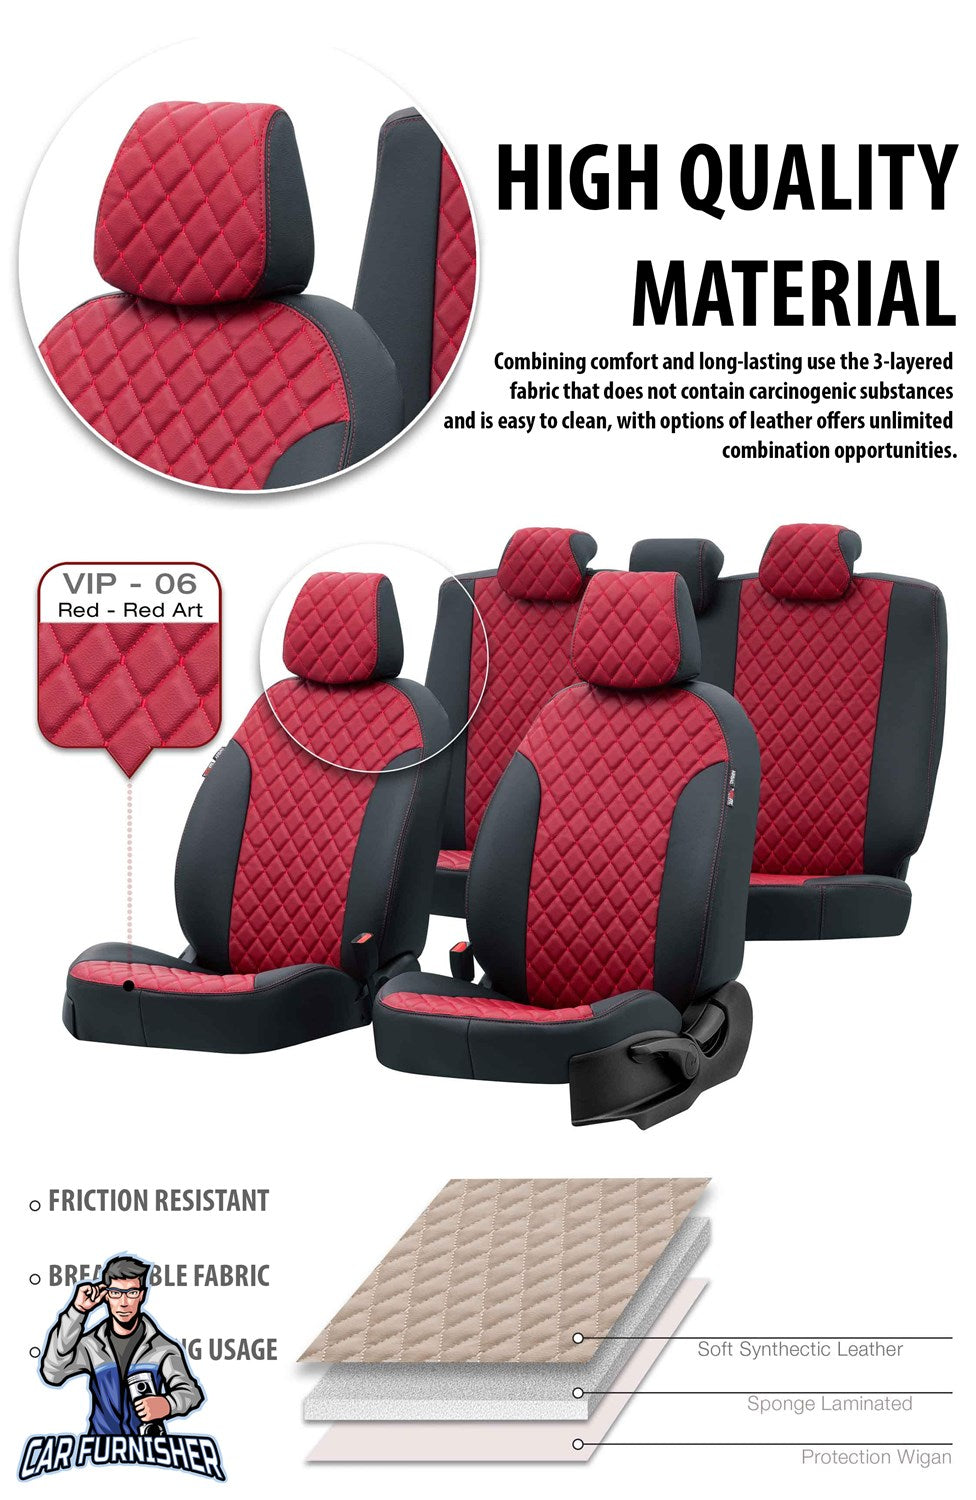 Mitsubishi Space Star Seat Cover Madrid Leather Design Red Leather